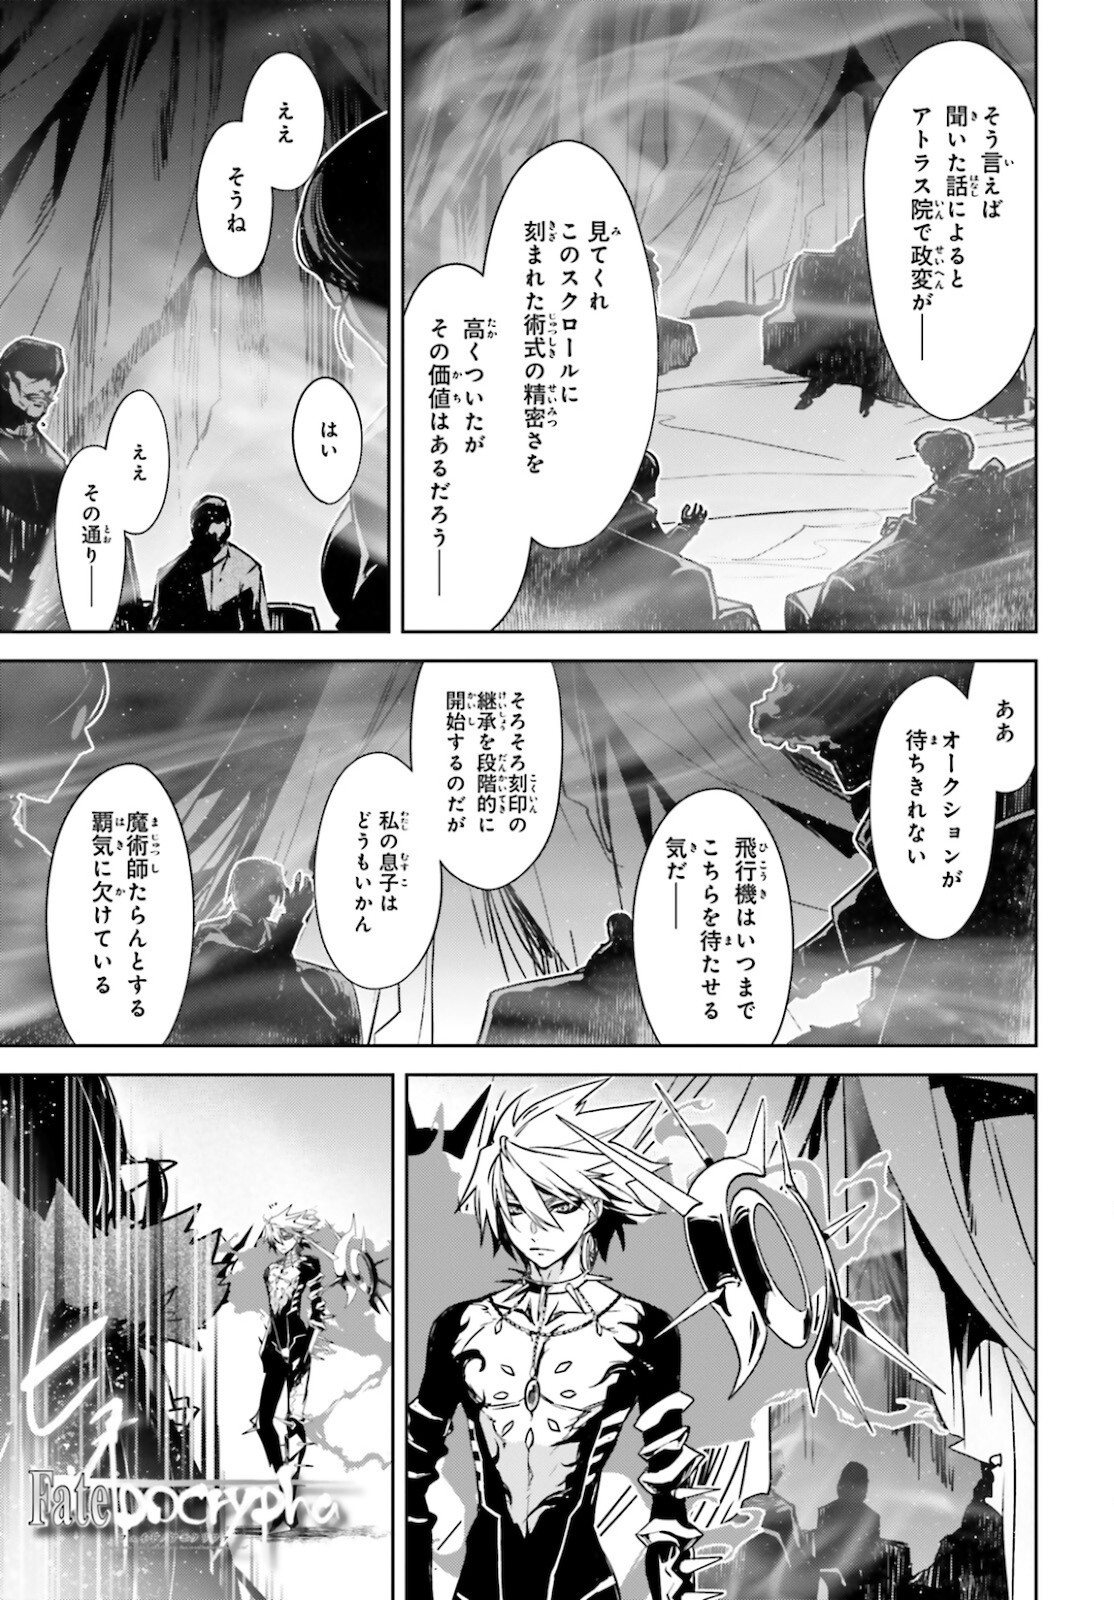 Fate-Apocrypha - Chapter 50 - Page 1